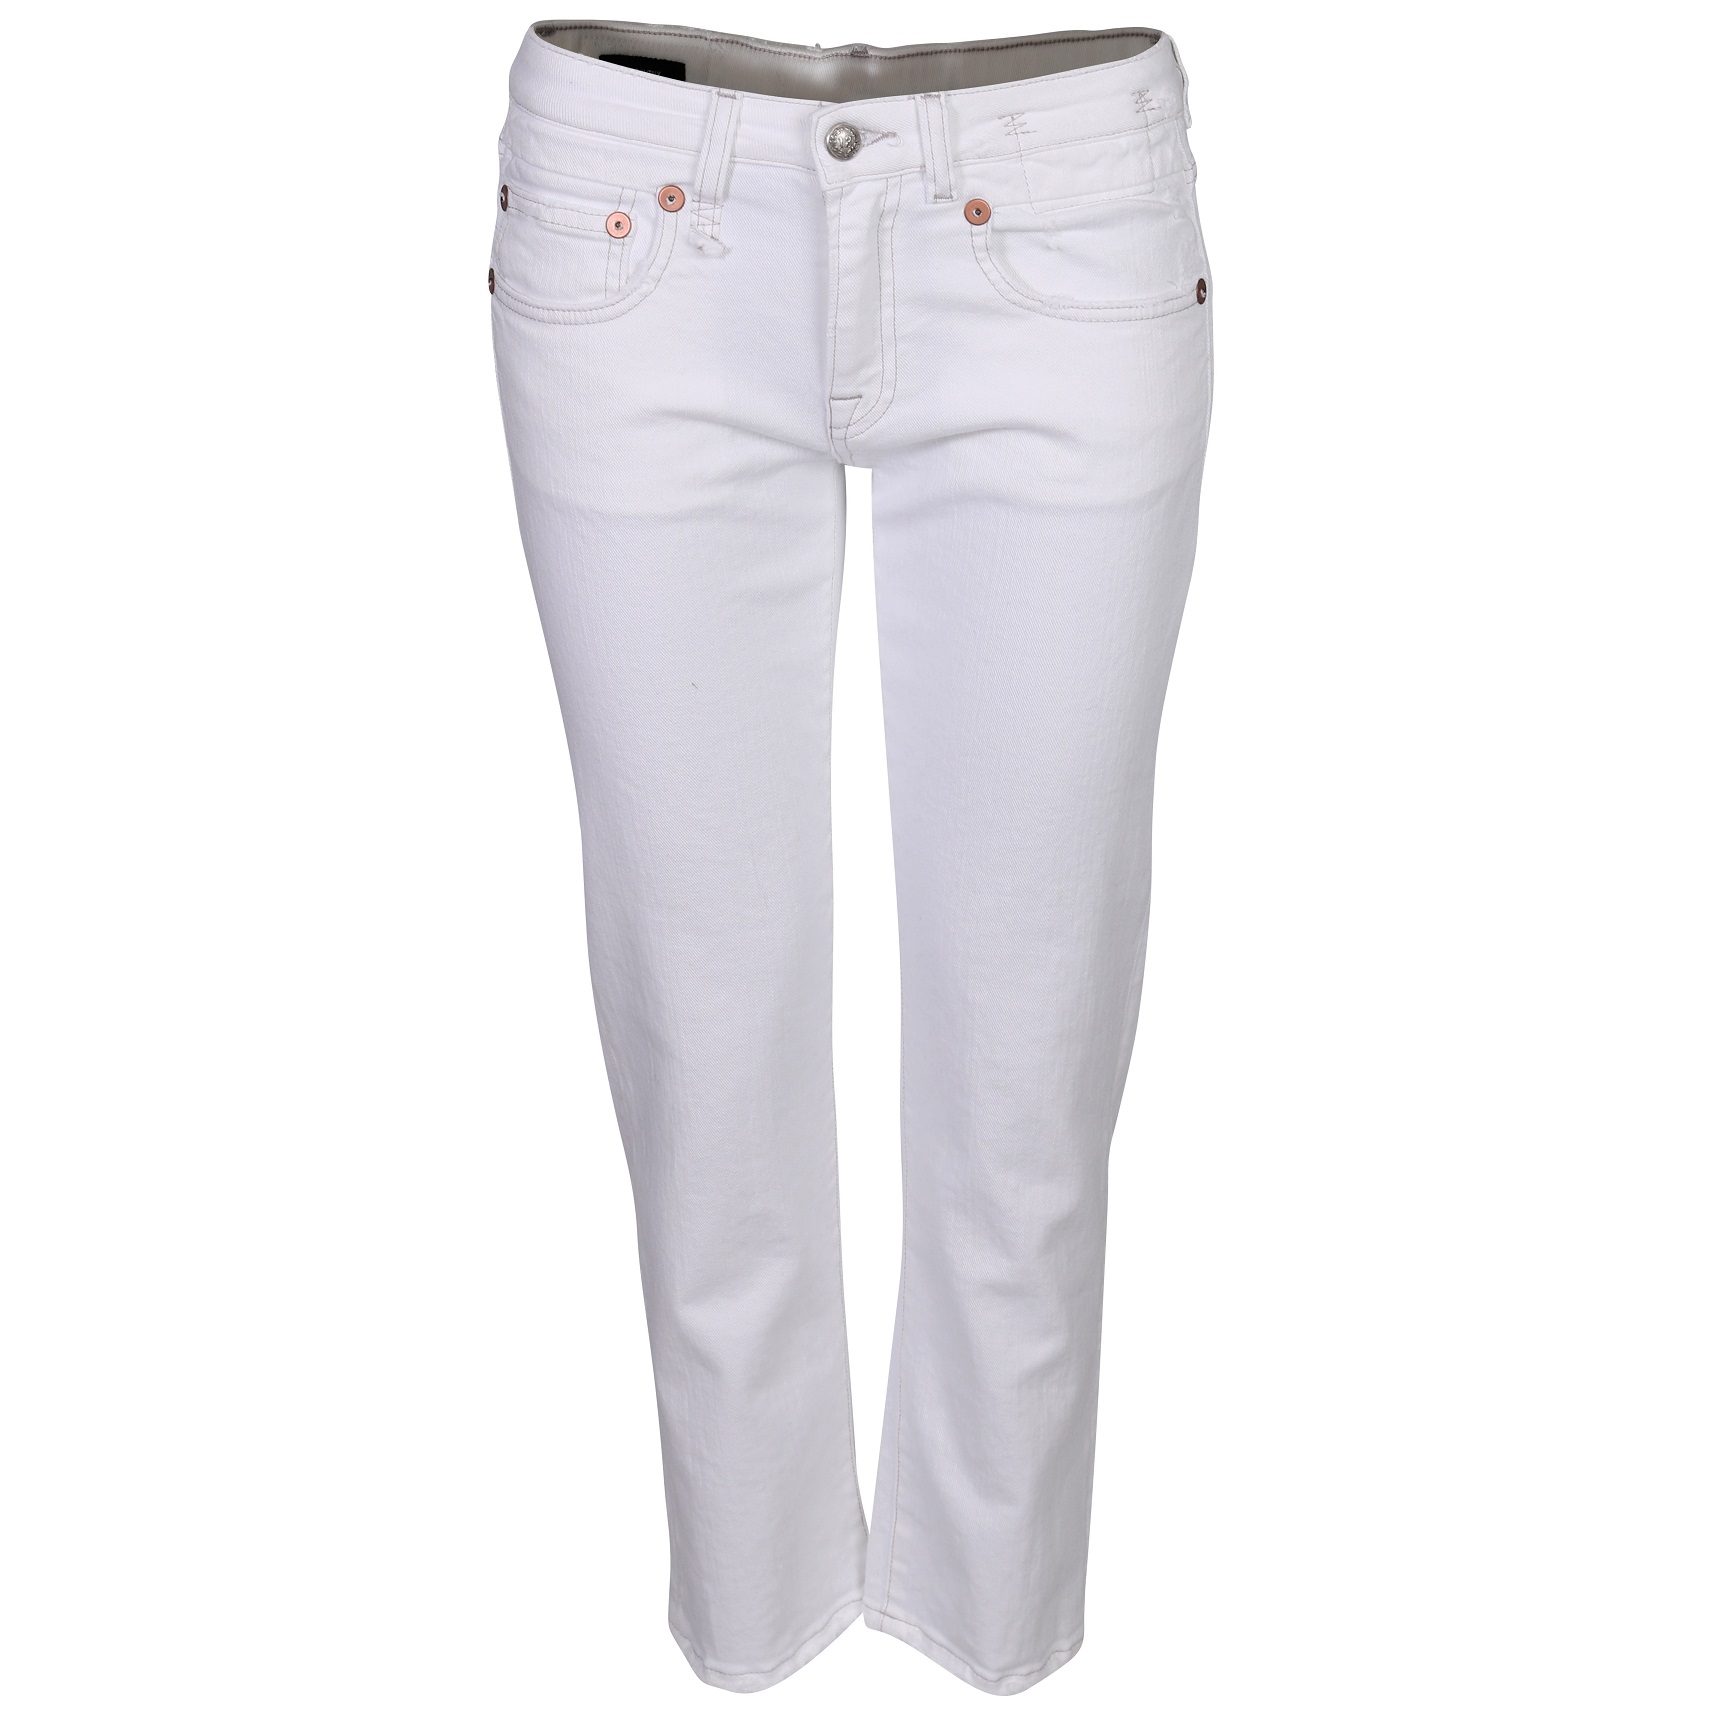 R13 Boy Straight Jeans in Bale White